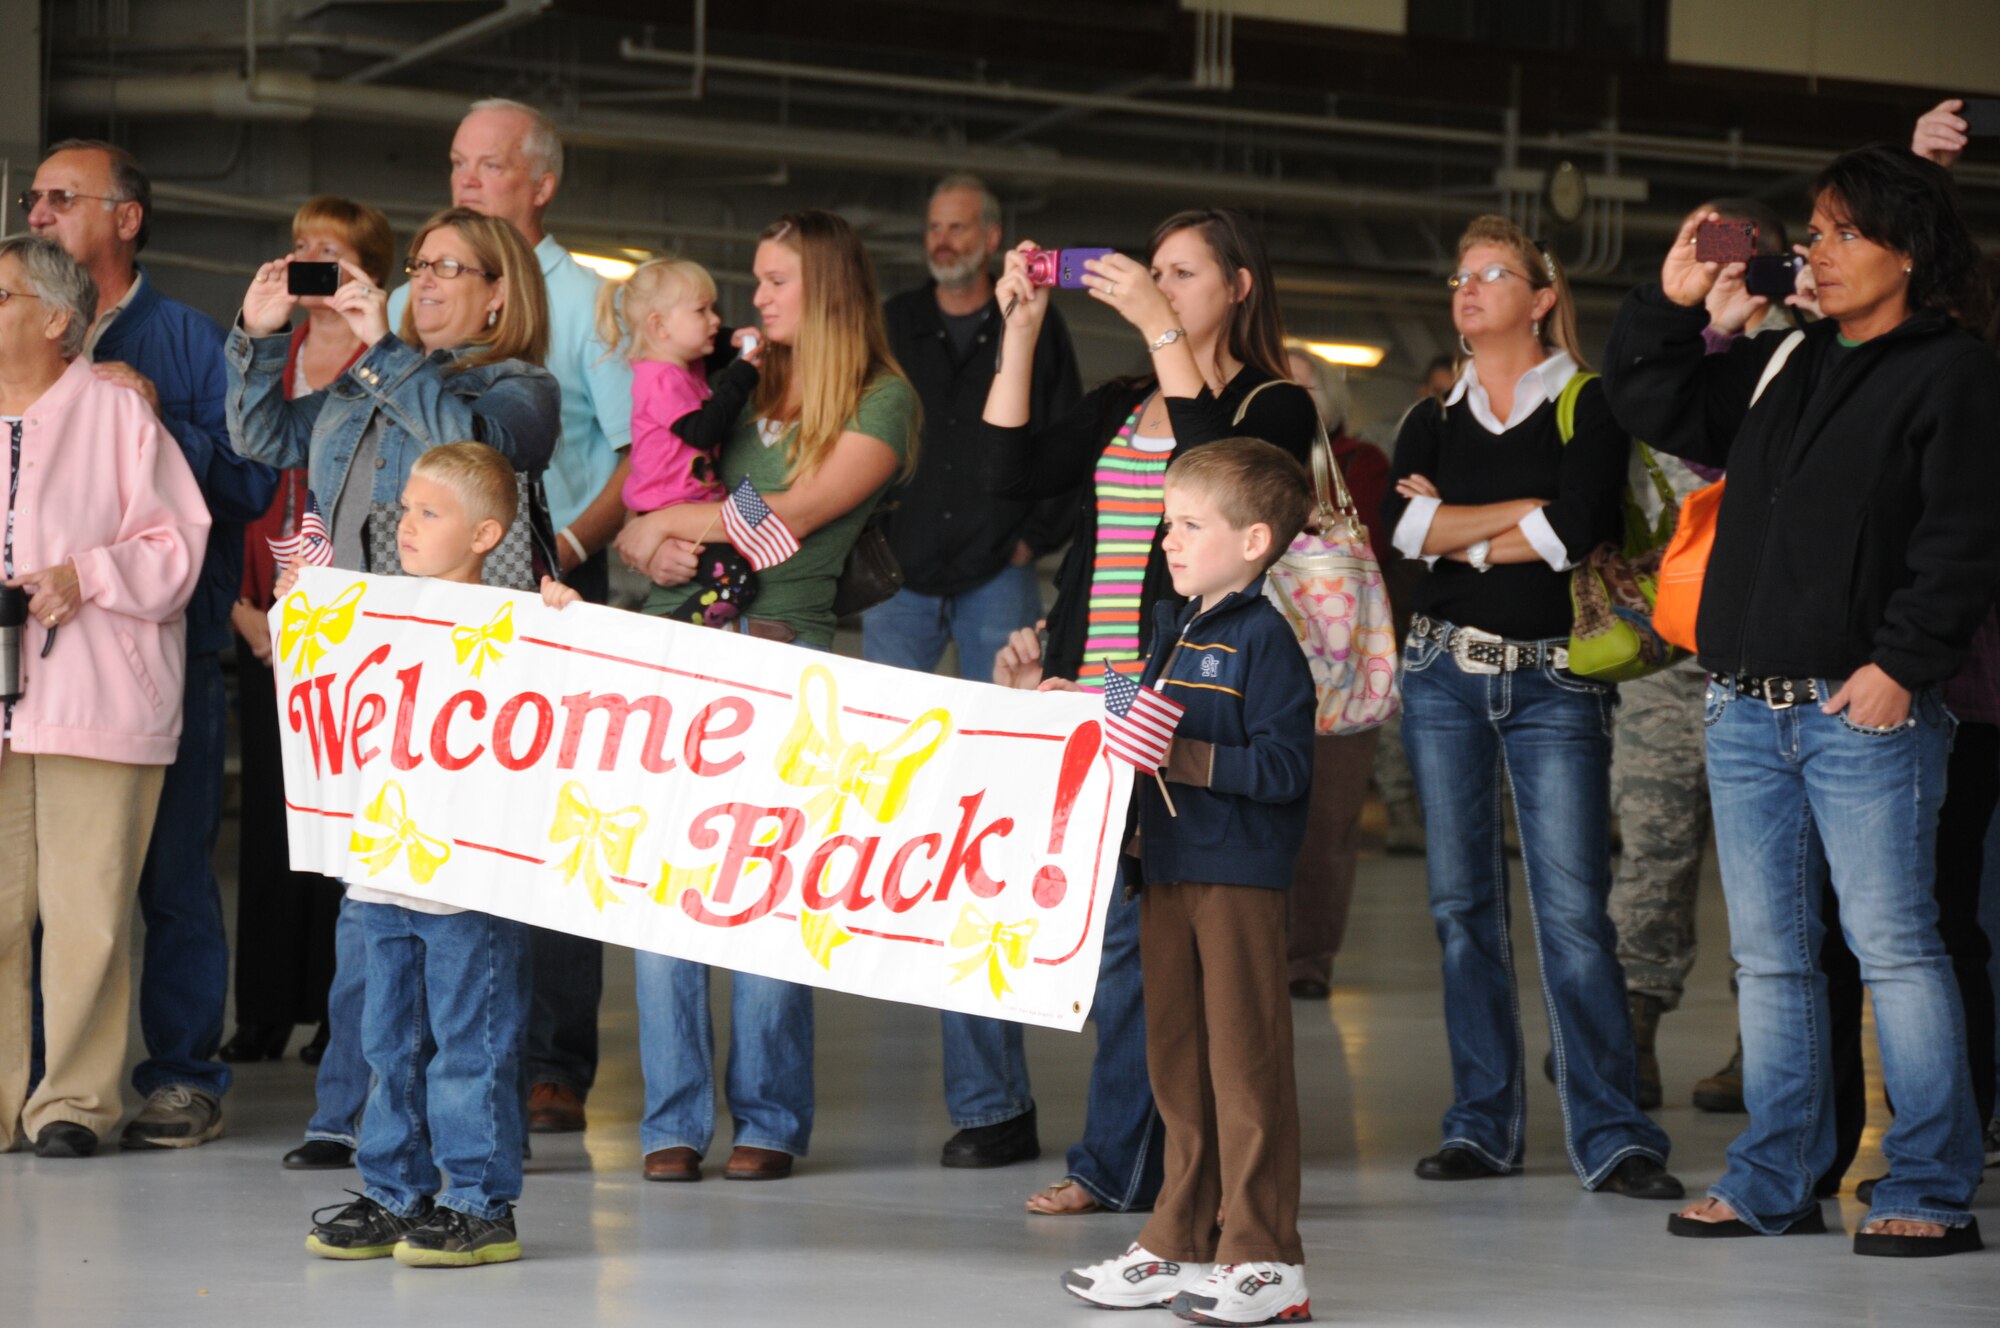 Family and friends of members of the 185th Air Refueling Wing, Security Forces Squadron, Sioux City, Iowa, await the arrival of their loved ones as they return home after a six month deployment to an undisclosed location in the South-west Theater of operations on 17 October, 2012. (US Air Force Photo by TSgt Brian Cox)